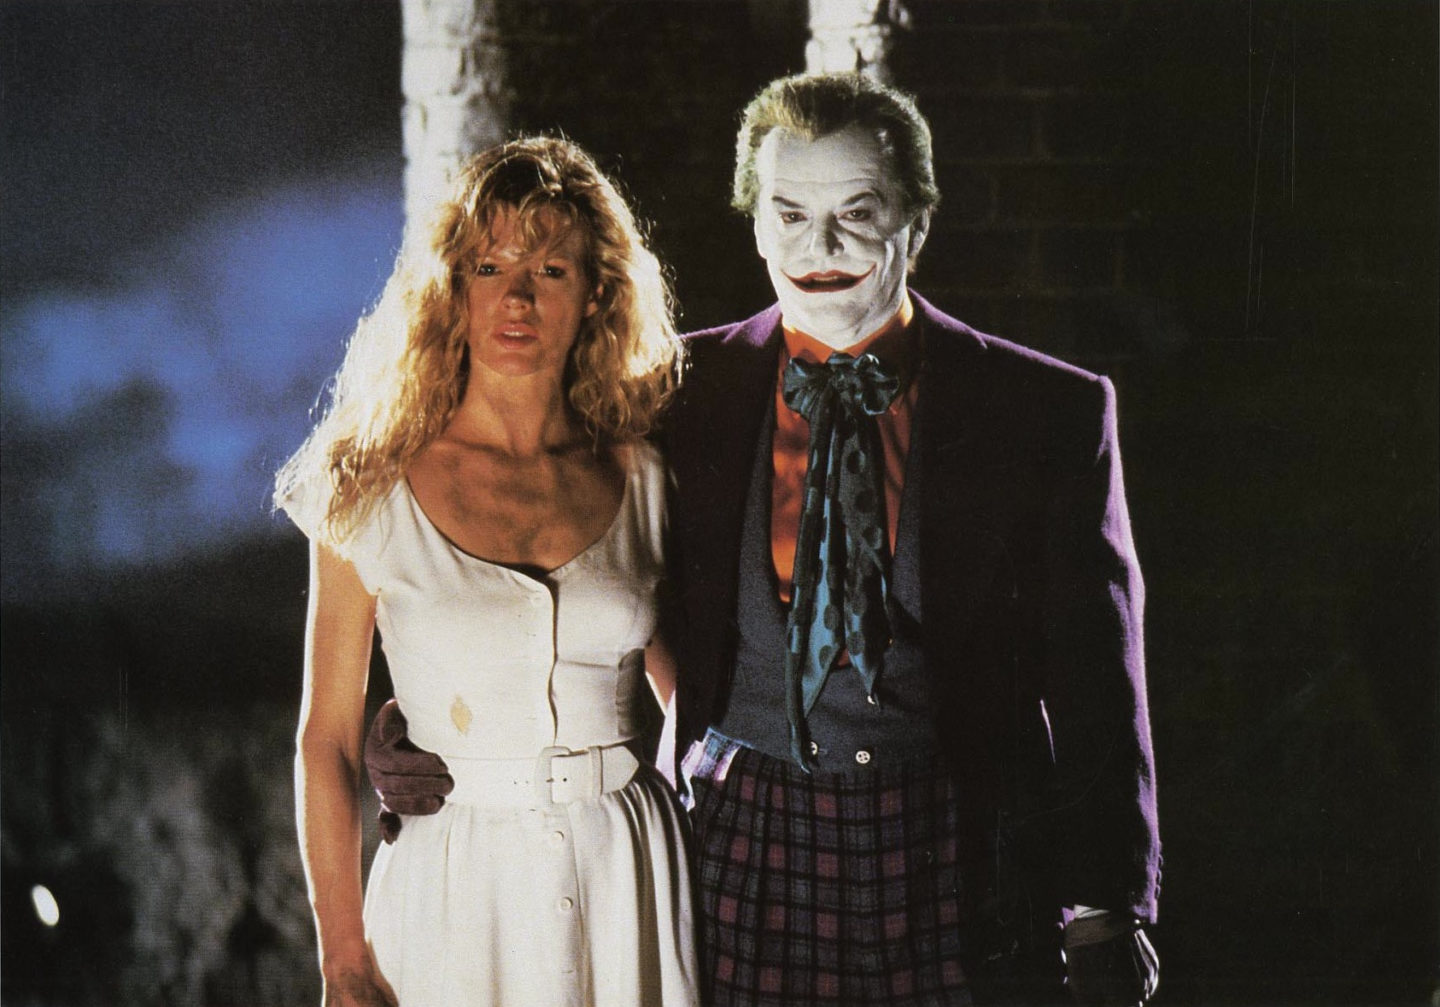 Vicki Vale Is A Style Icon. Here's Why... - High. How Are You?